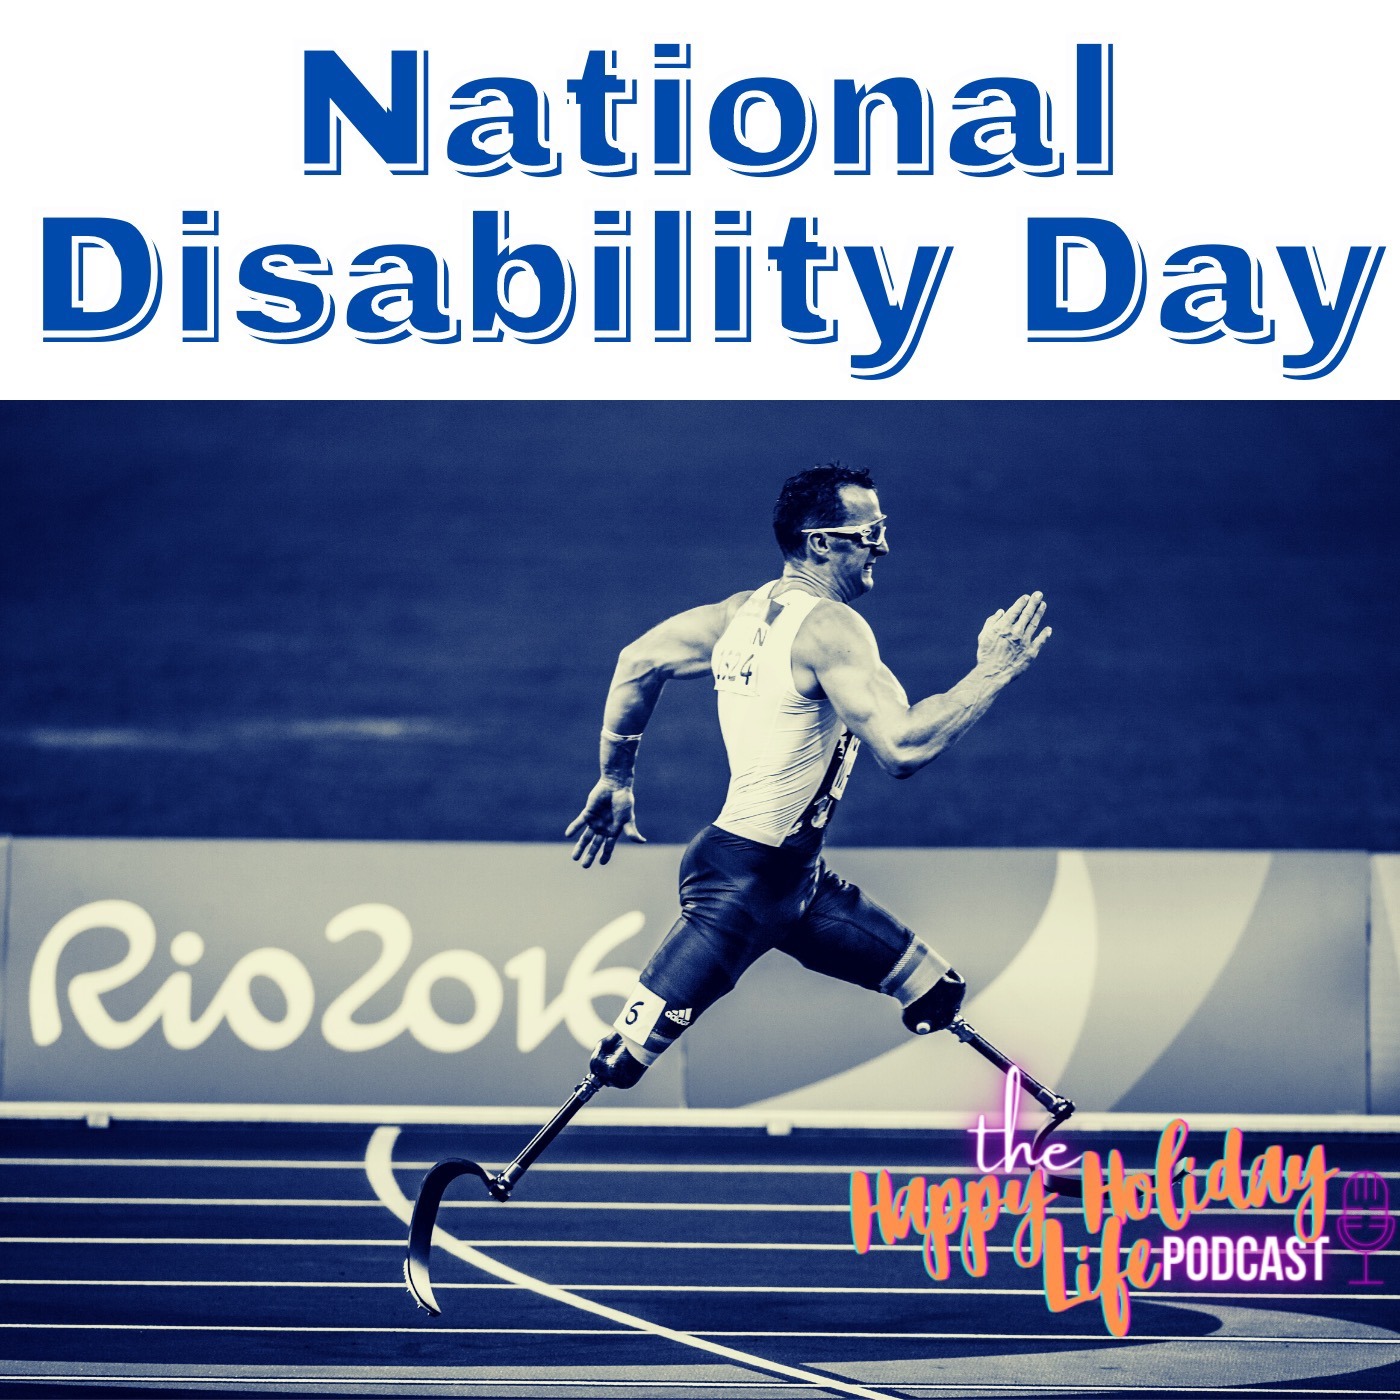 Episode #032 National Disability Day Image